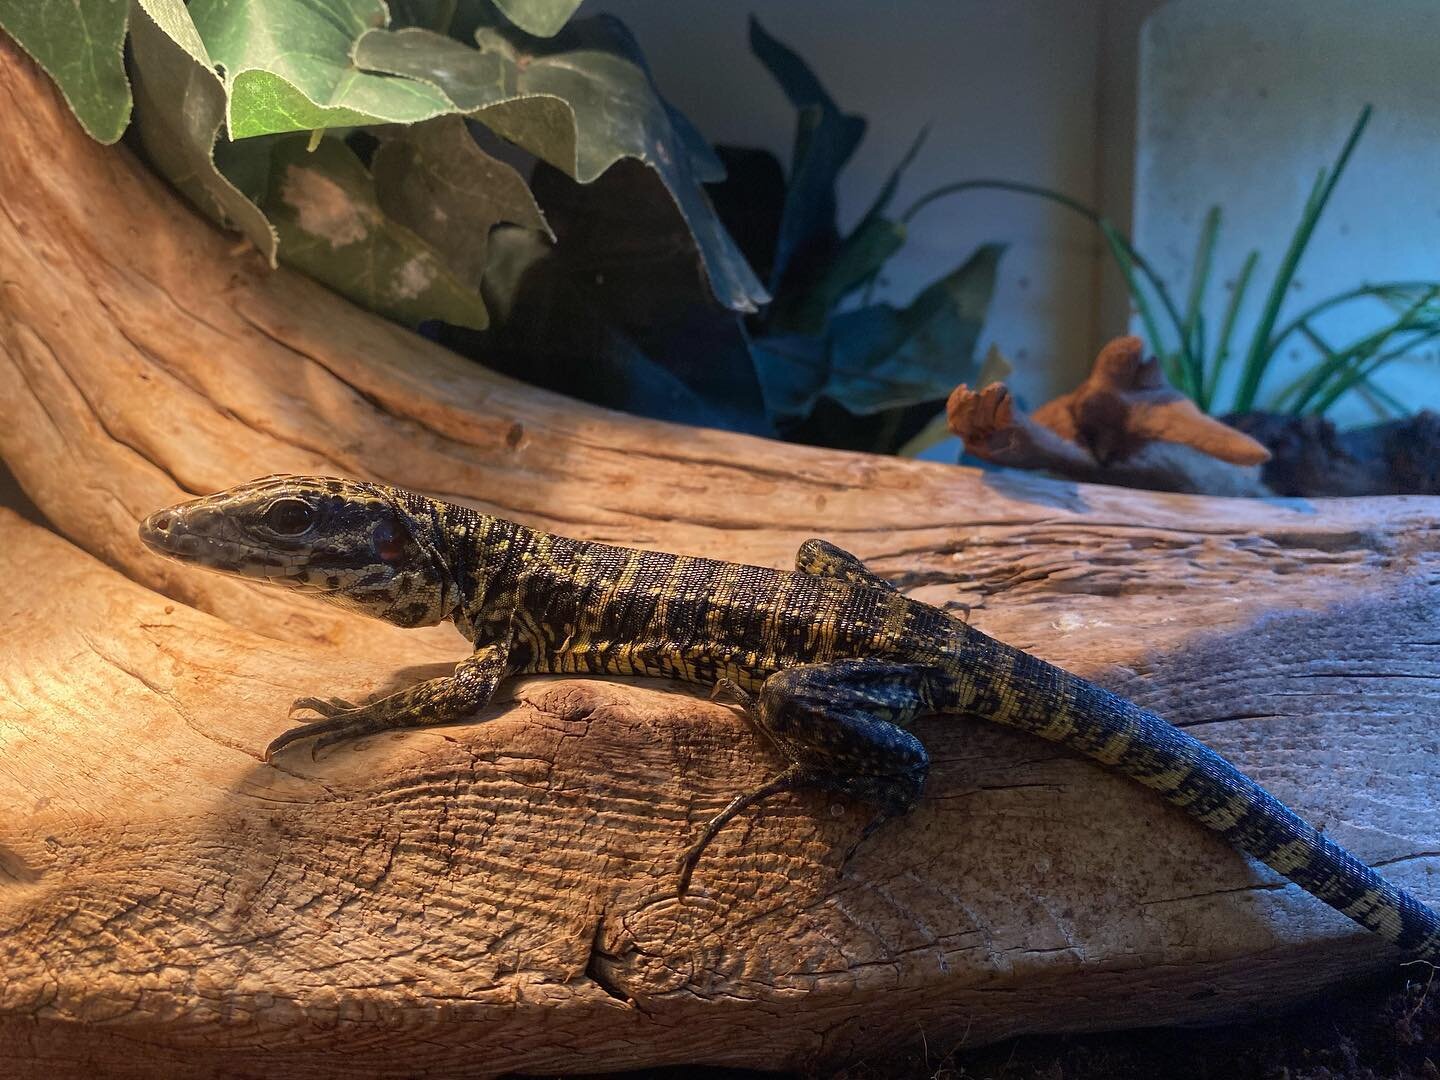 Need something to do on this rainy day? We got two adorable golden baby tegus in today! Come check these sweet little things out yourself!
.
.
.
#tegu #lizard #reptile #golden #aquariumworldlafayette #lafayette #indiana #aquarium #fish #saltwater #fr